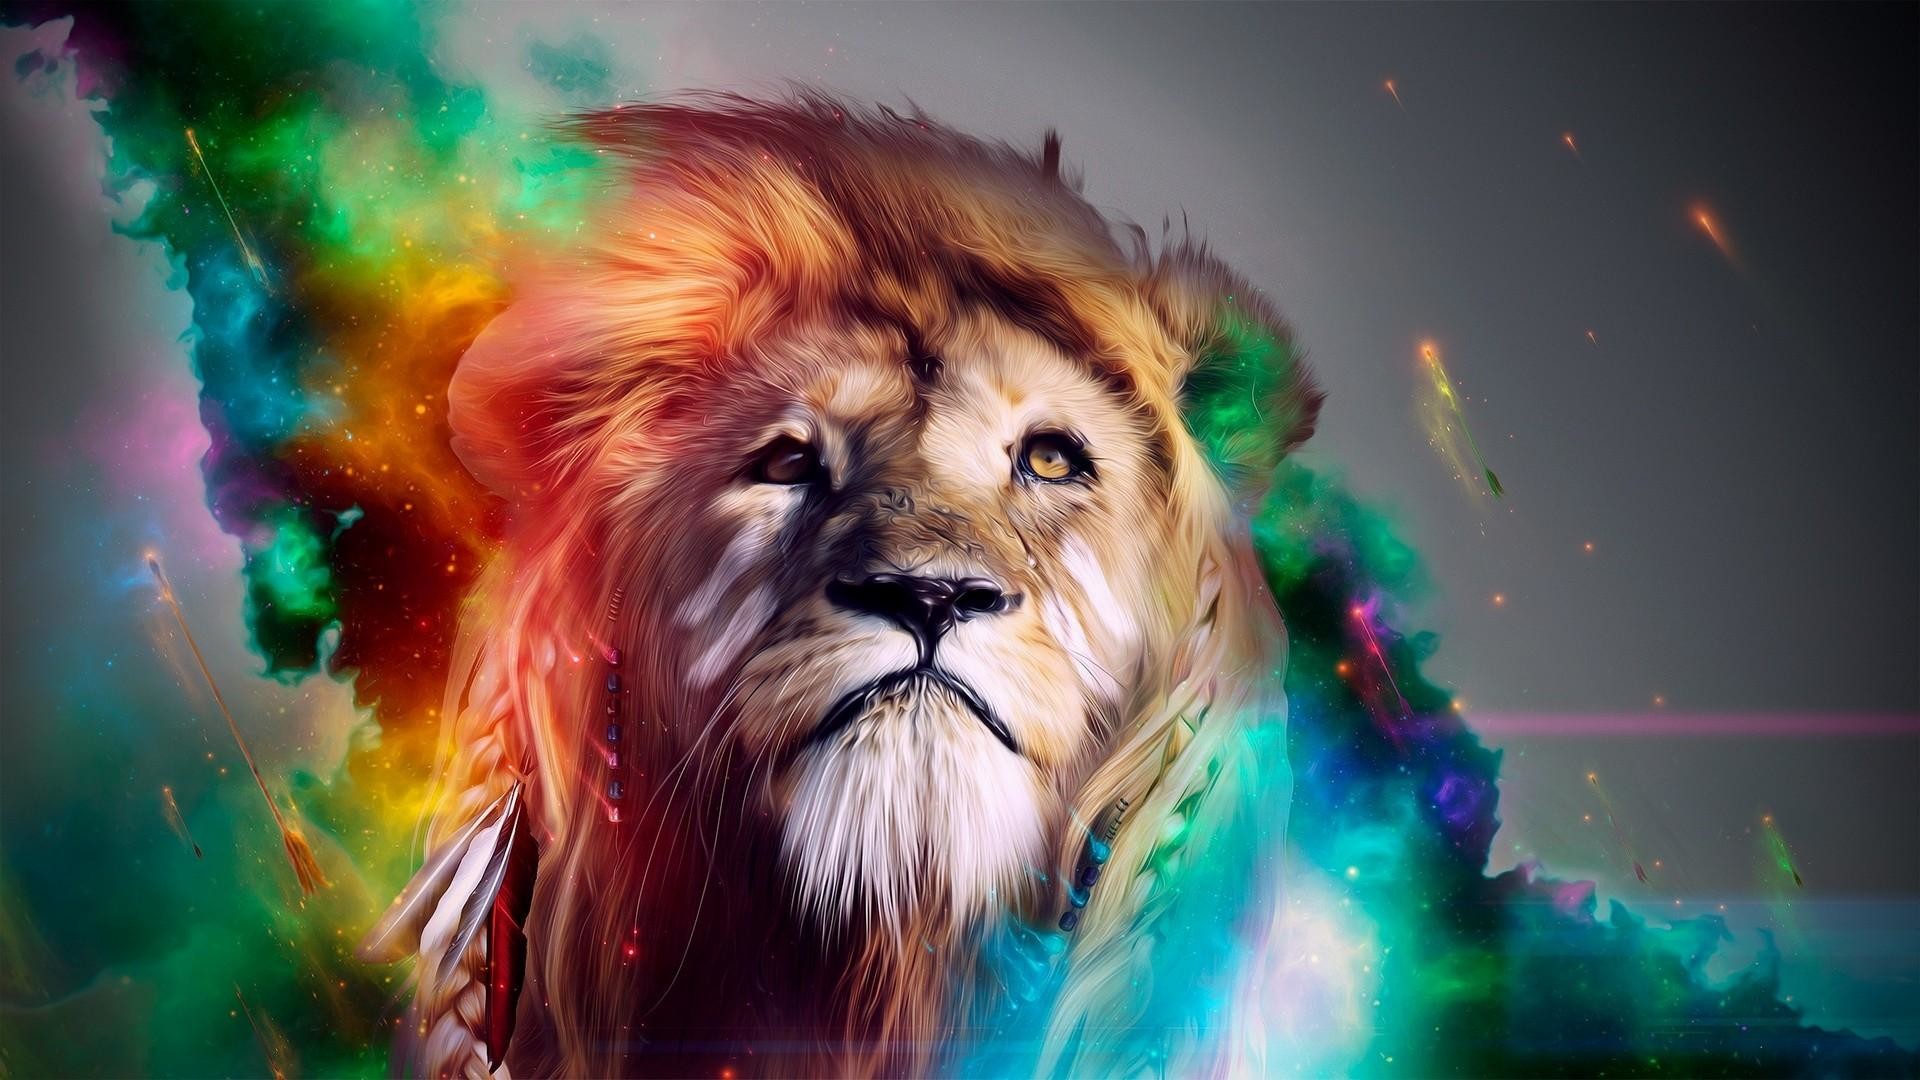 1920x1080 Explore Lion Wallpaper, Hipster Wallpaper, and more!